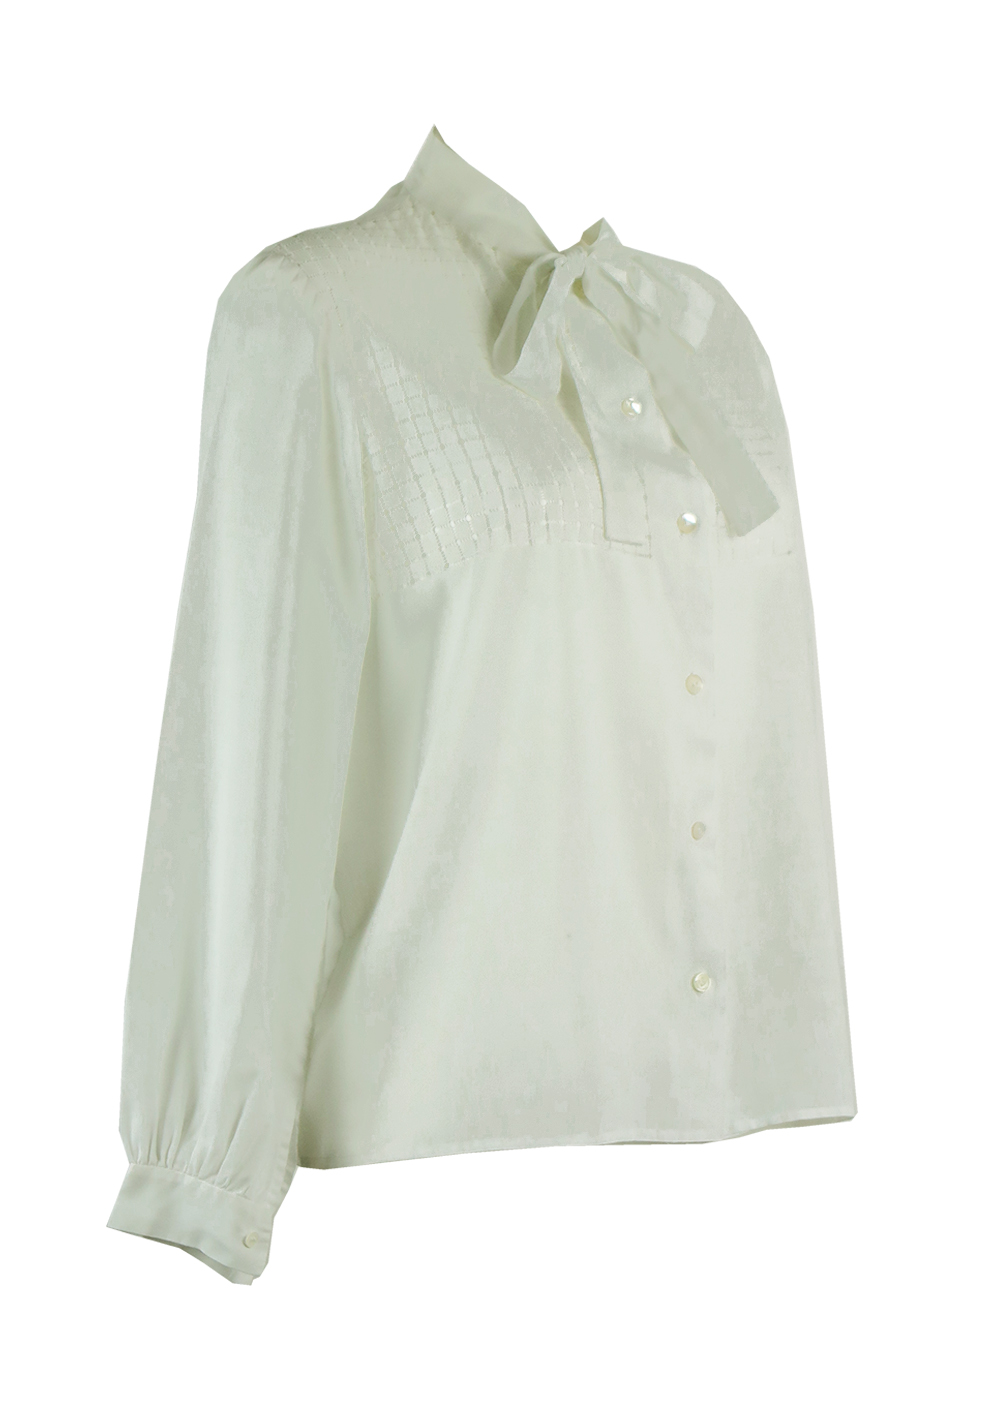 Vintage 1960's White Pussy Bow Blouse with Cut Away Detail - L/XL ...